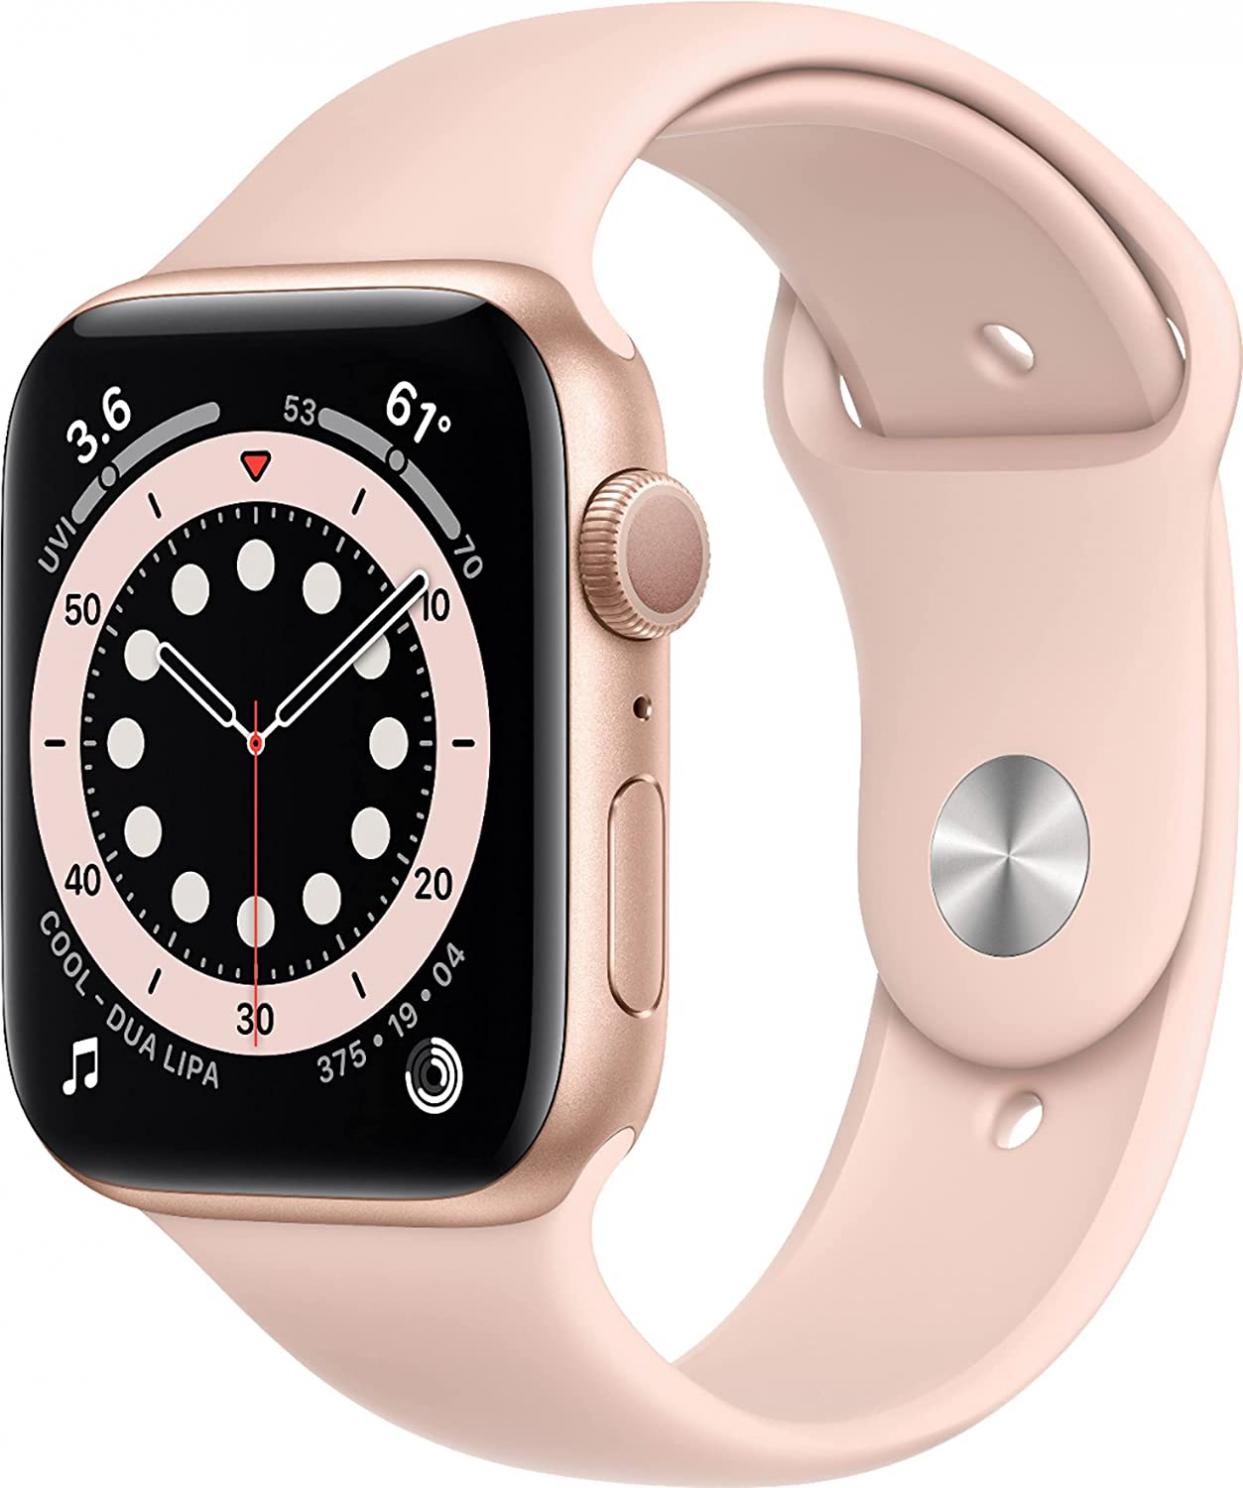 Apple Watch Series 6 (GPS, 44mm) - Gold Aluminum Case with Pink Sand Sport Band (Renewed Premium)